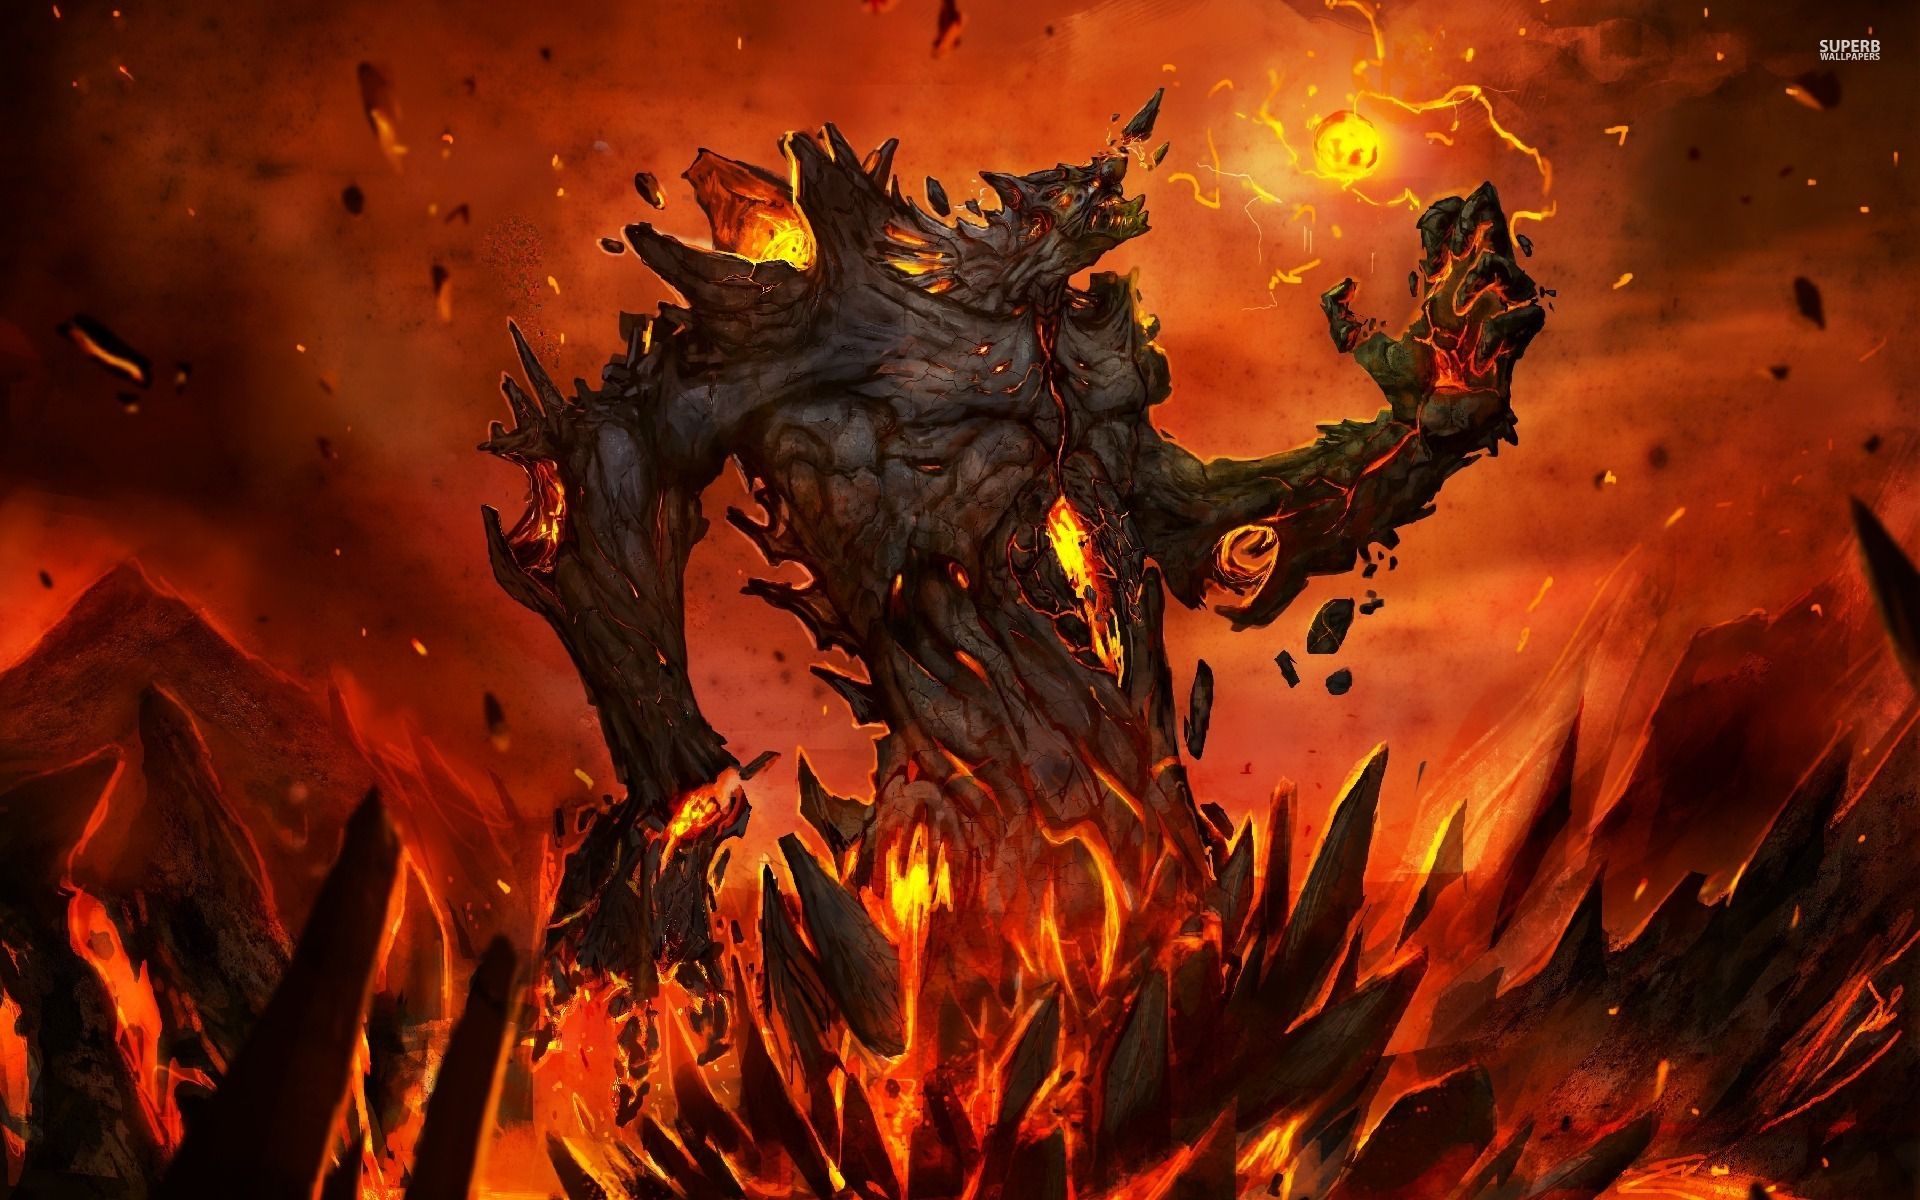 Magma Monster - TinyMonsters wallpaper - Game wallpapers - #30673